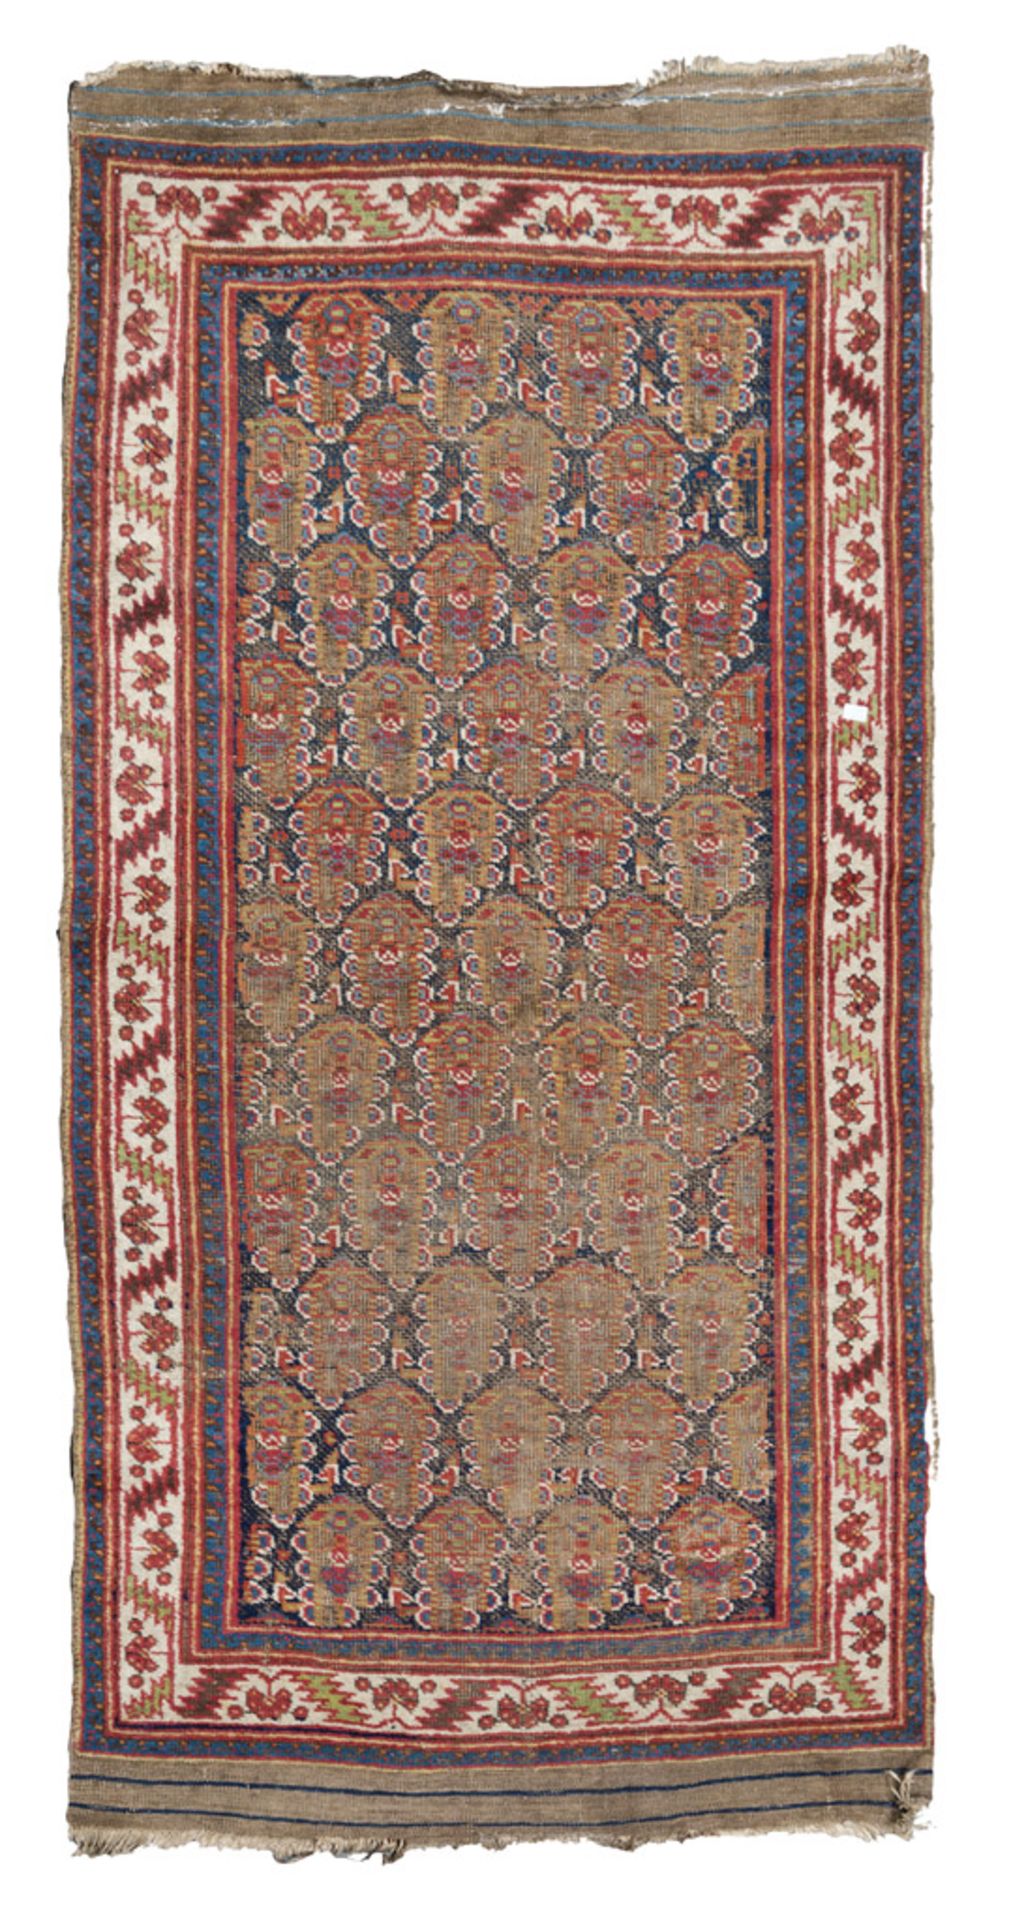 CAUCASIAN KARABAGH CARPET, EARLY 20TH CENTURY desing of flower branches in the center field on